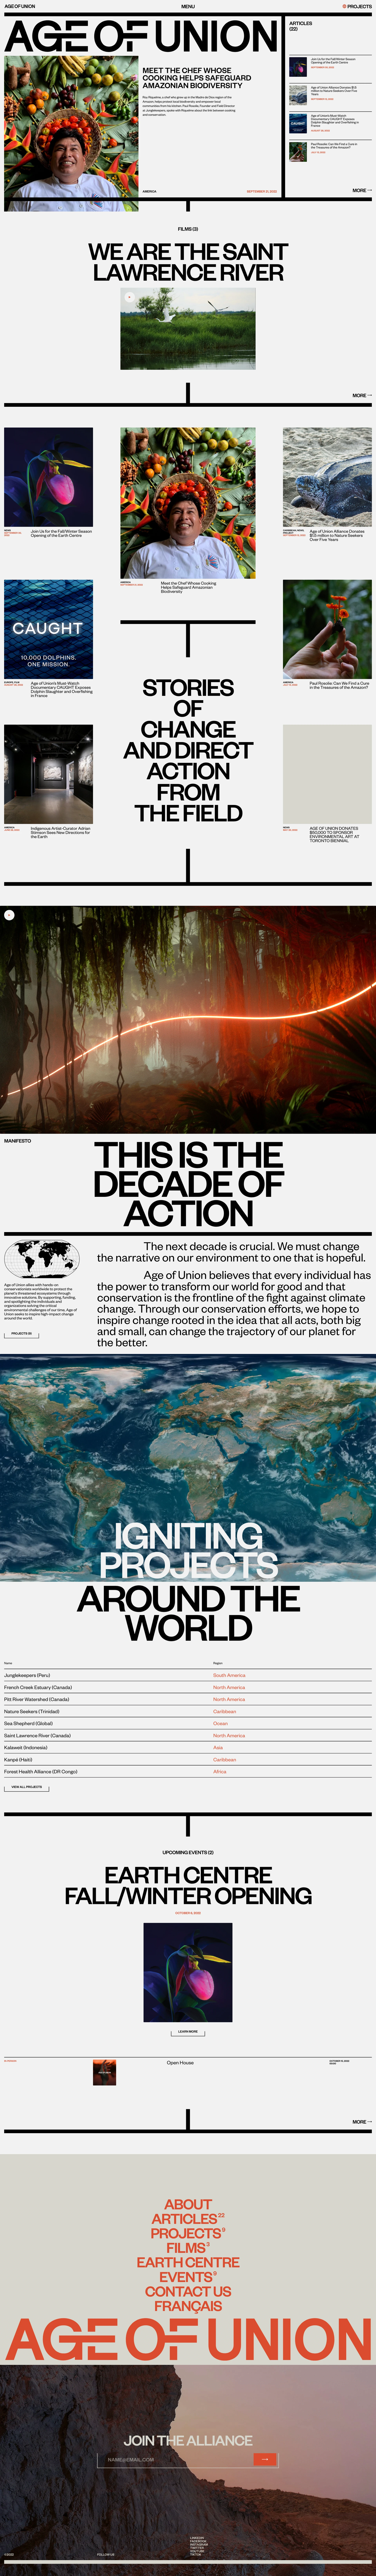 Age of Union Landing Page Example: The next decade is crucial. We must change the narrative on our environment to one that is hopeful.